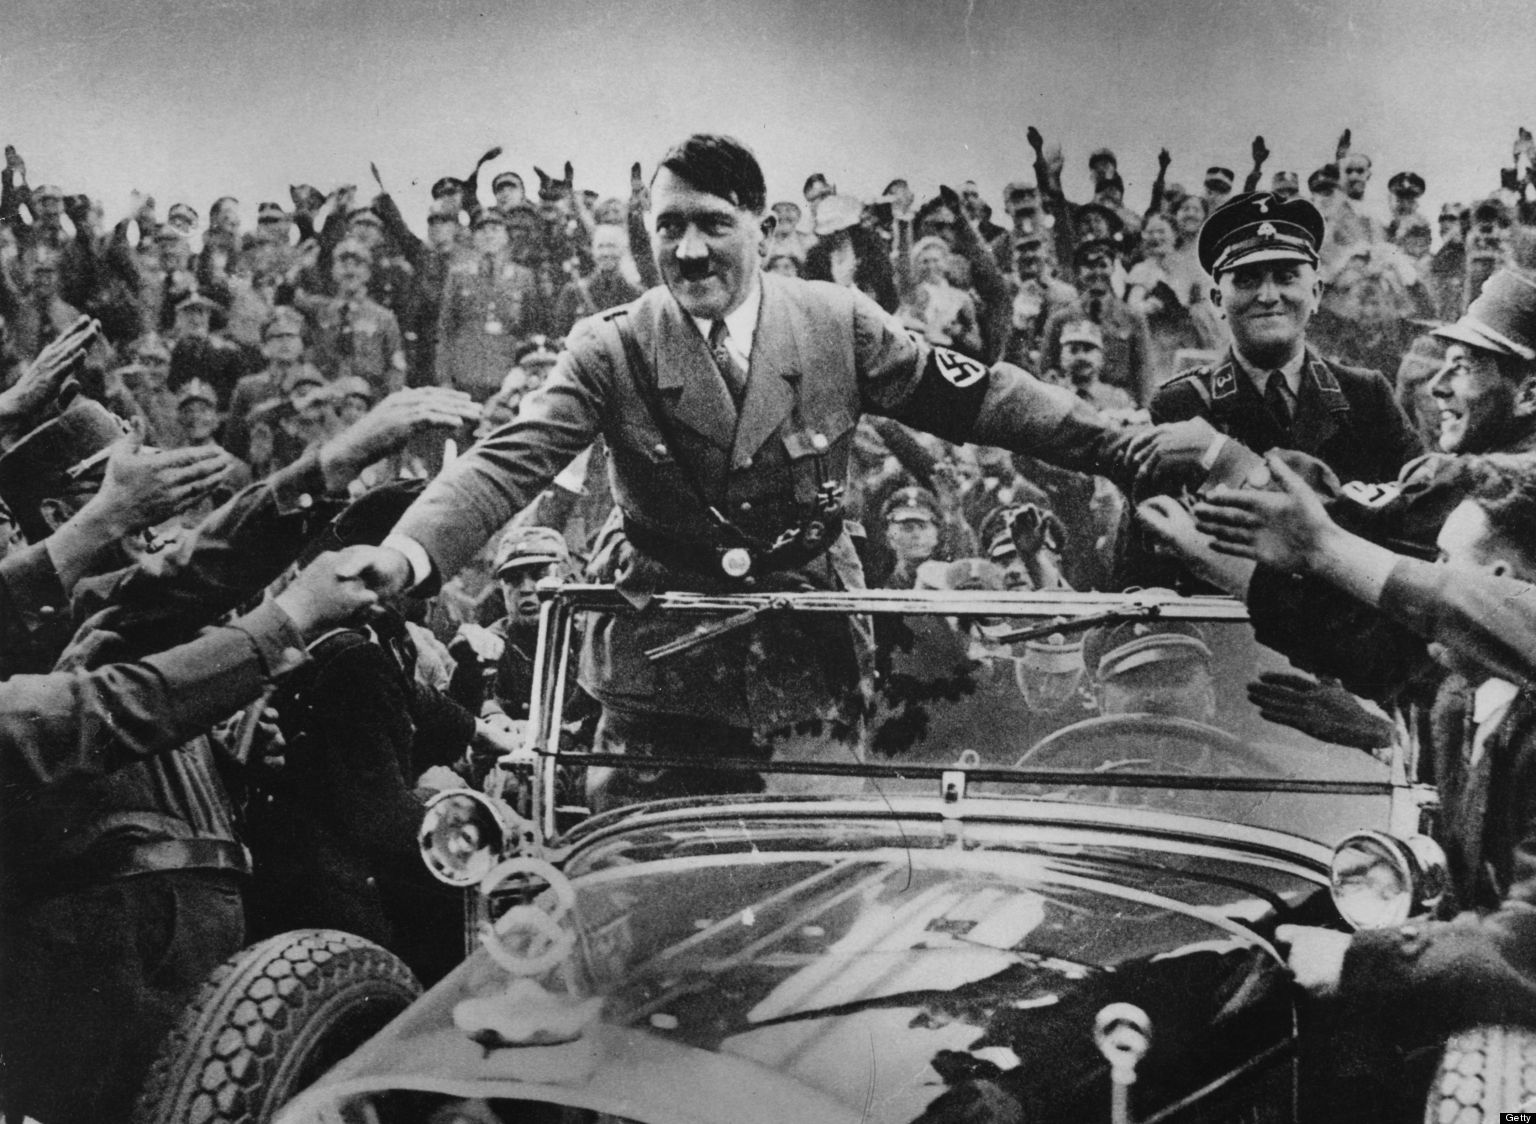 1933: Adolf Hitler (1889 - 1945), chancellor of Germany, is welcomed by supporters at Nuremberg. (Photo by Hulton Archive/Getty Images)